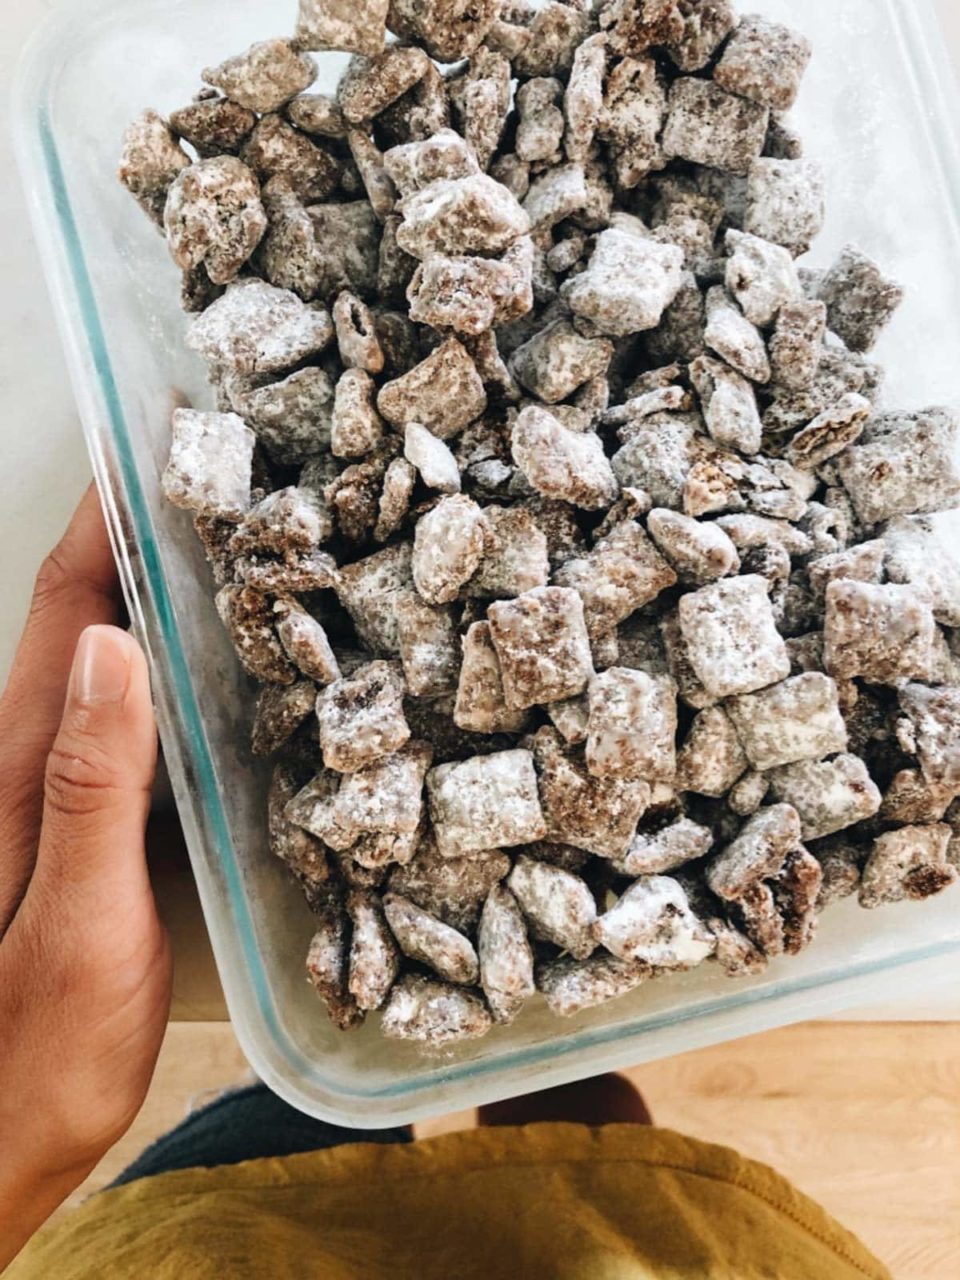 Frozen puppy chow in a container.